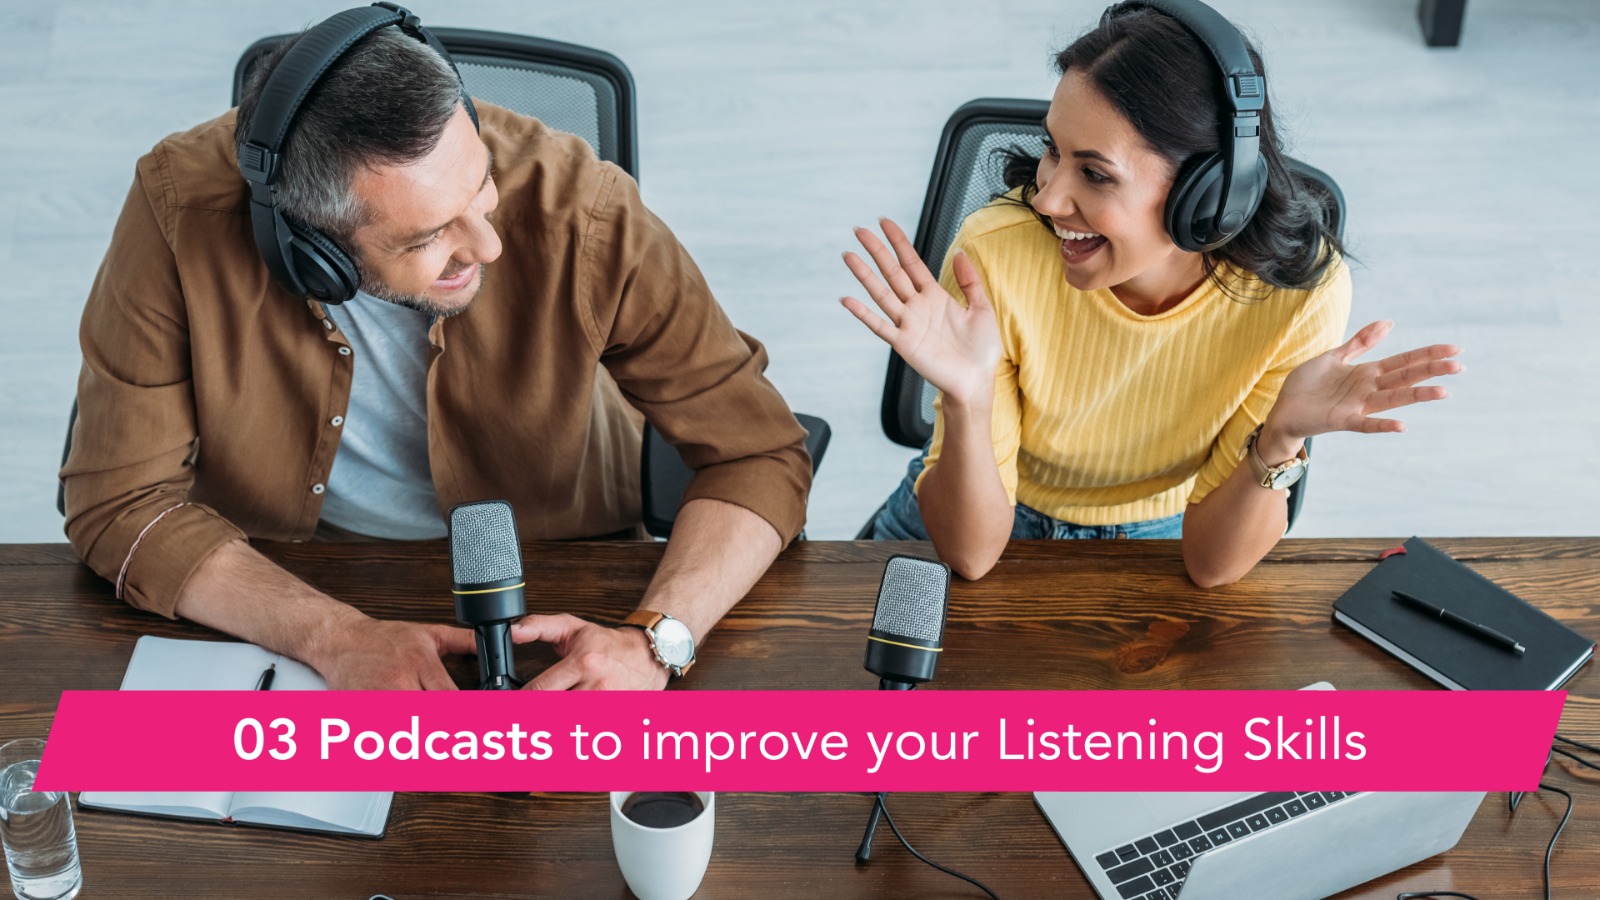 03 Podcasts to improve your Listening Skills